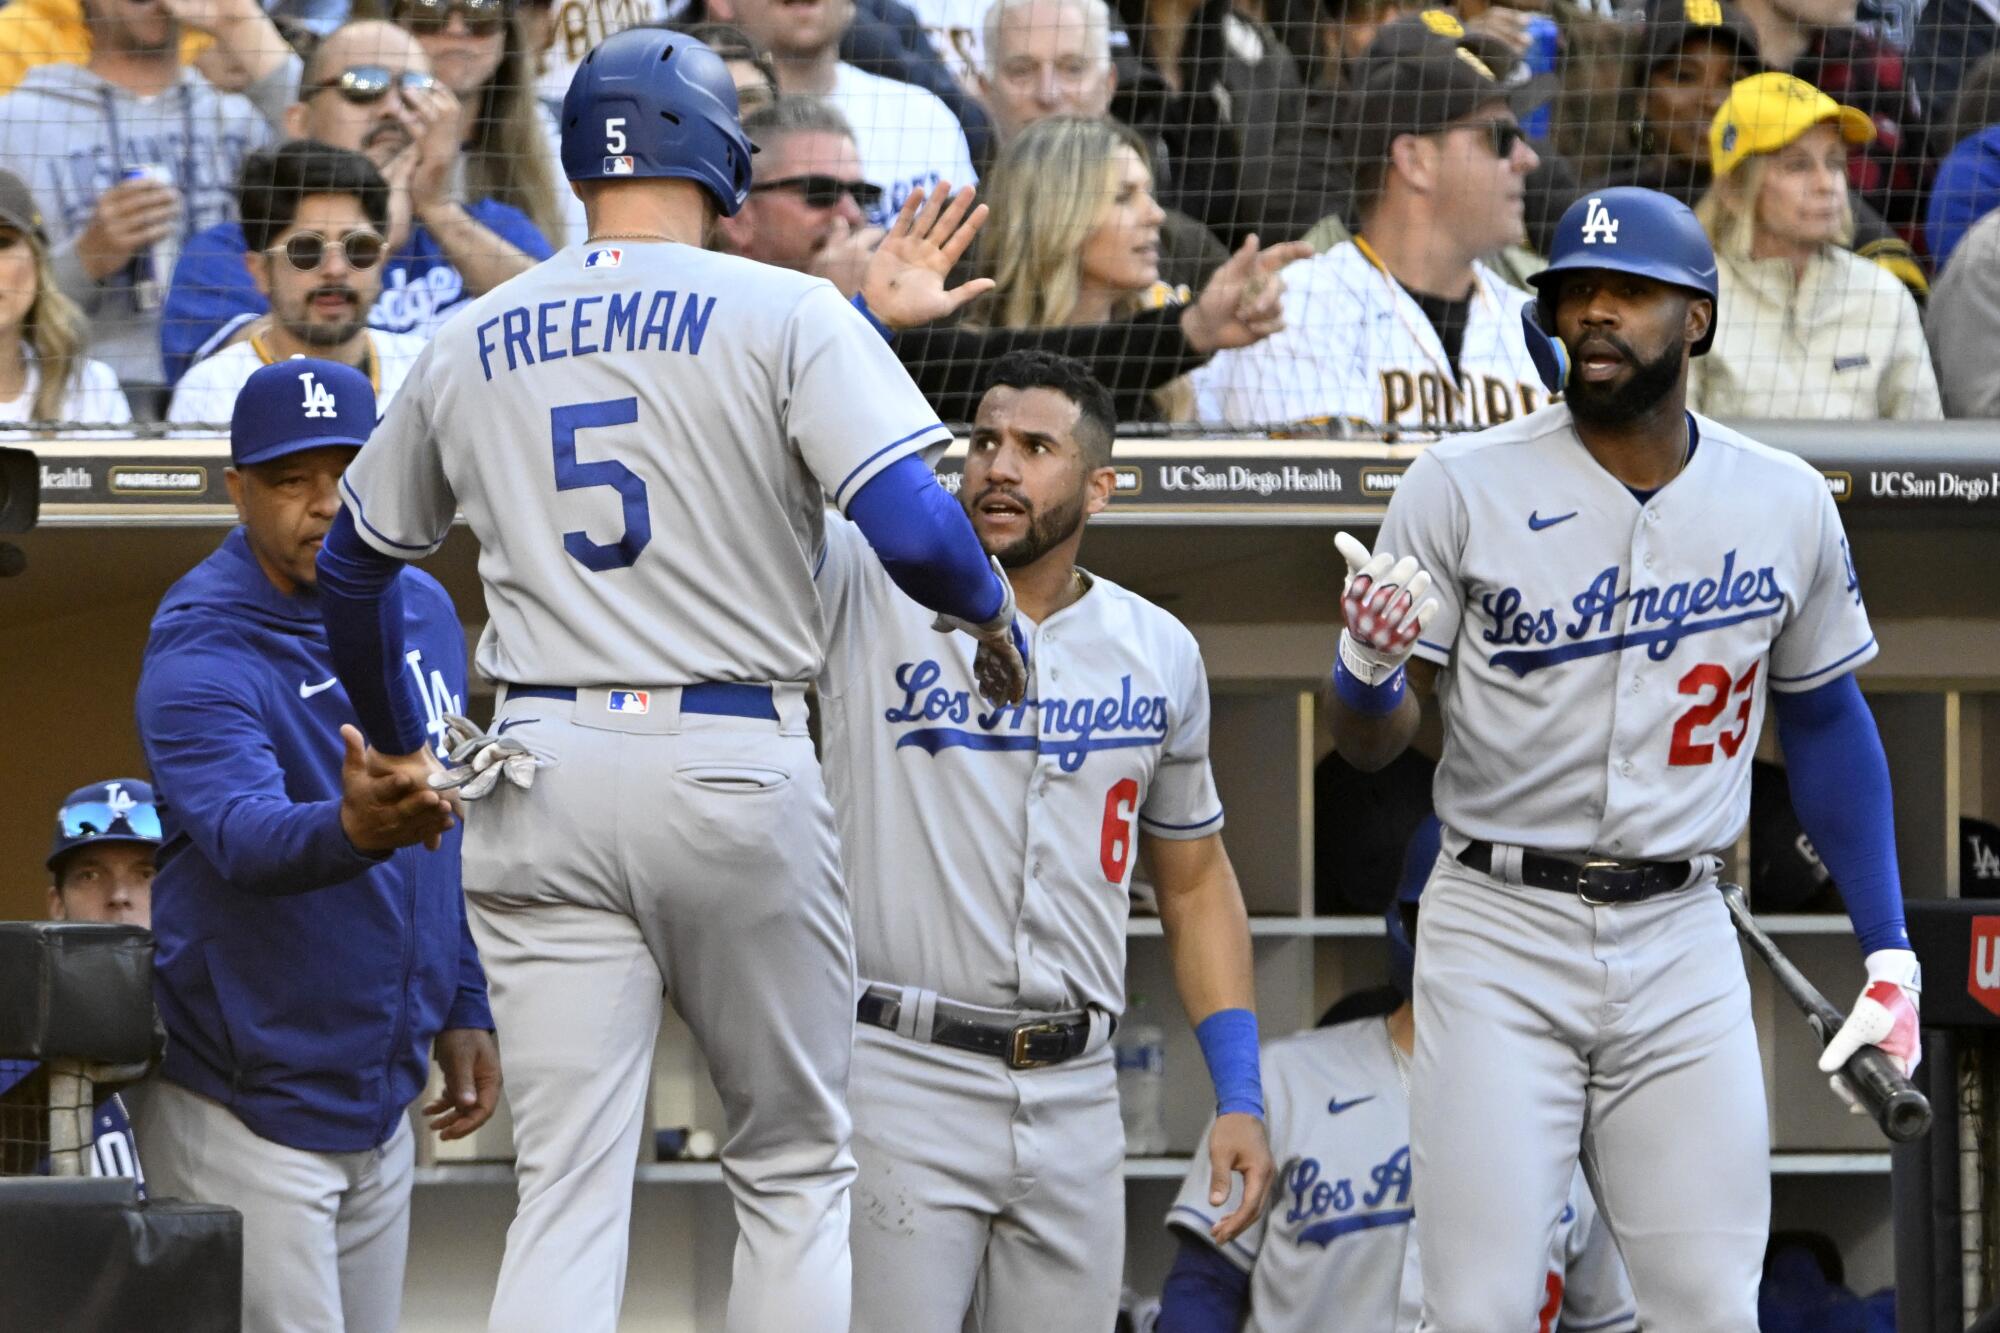 Freddie Freeman celebrates with (from left) Dodgers manager Dave Roberts, David Peralta and Jason Heyward after scoring.